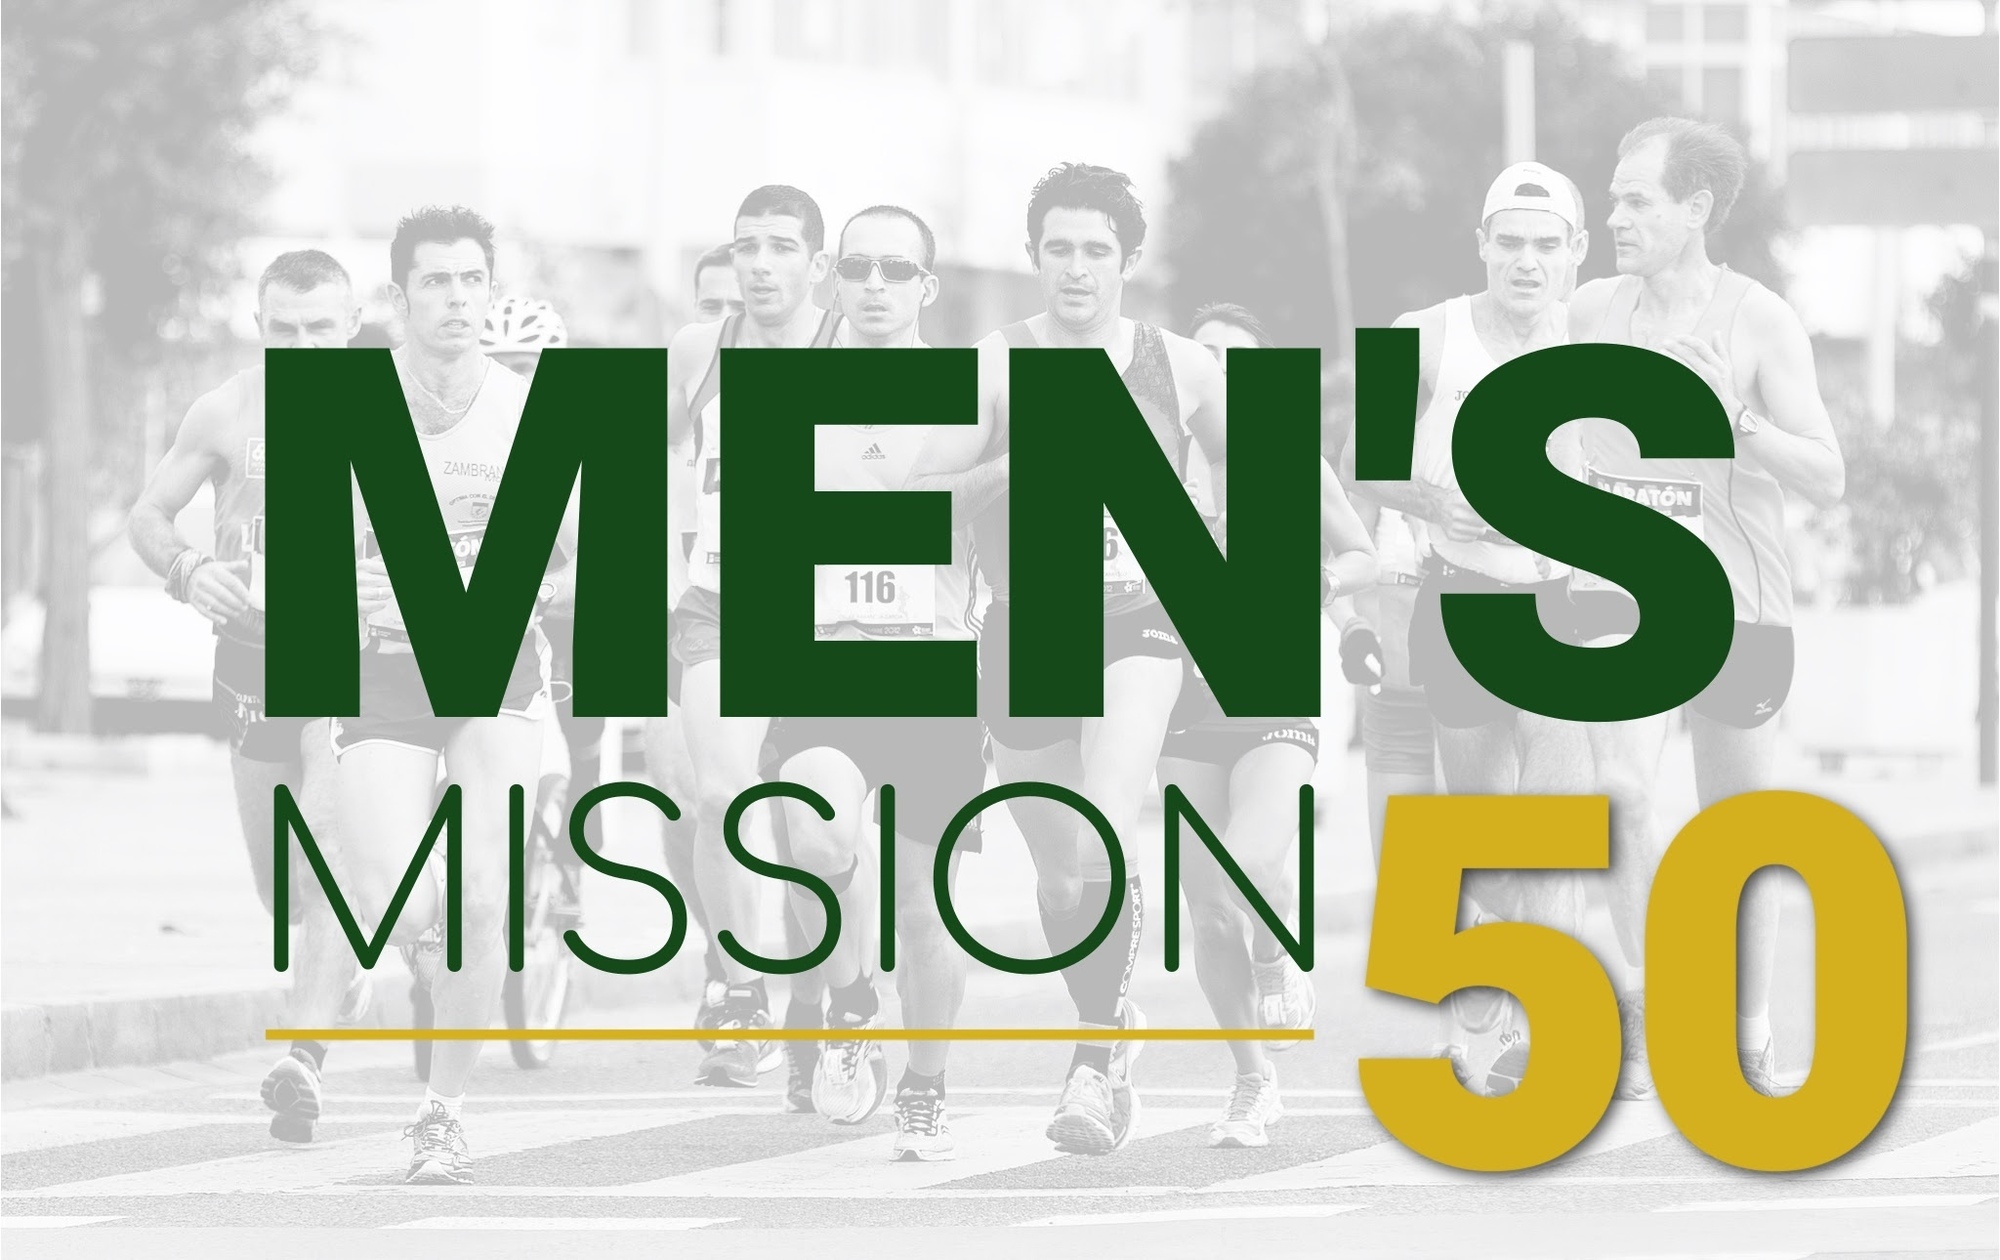 Men’s mission 50 with group of men running in marathon in black and white